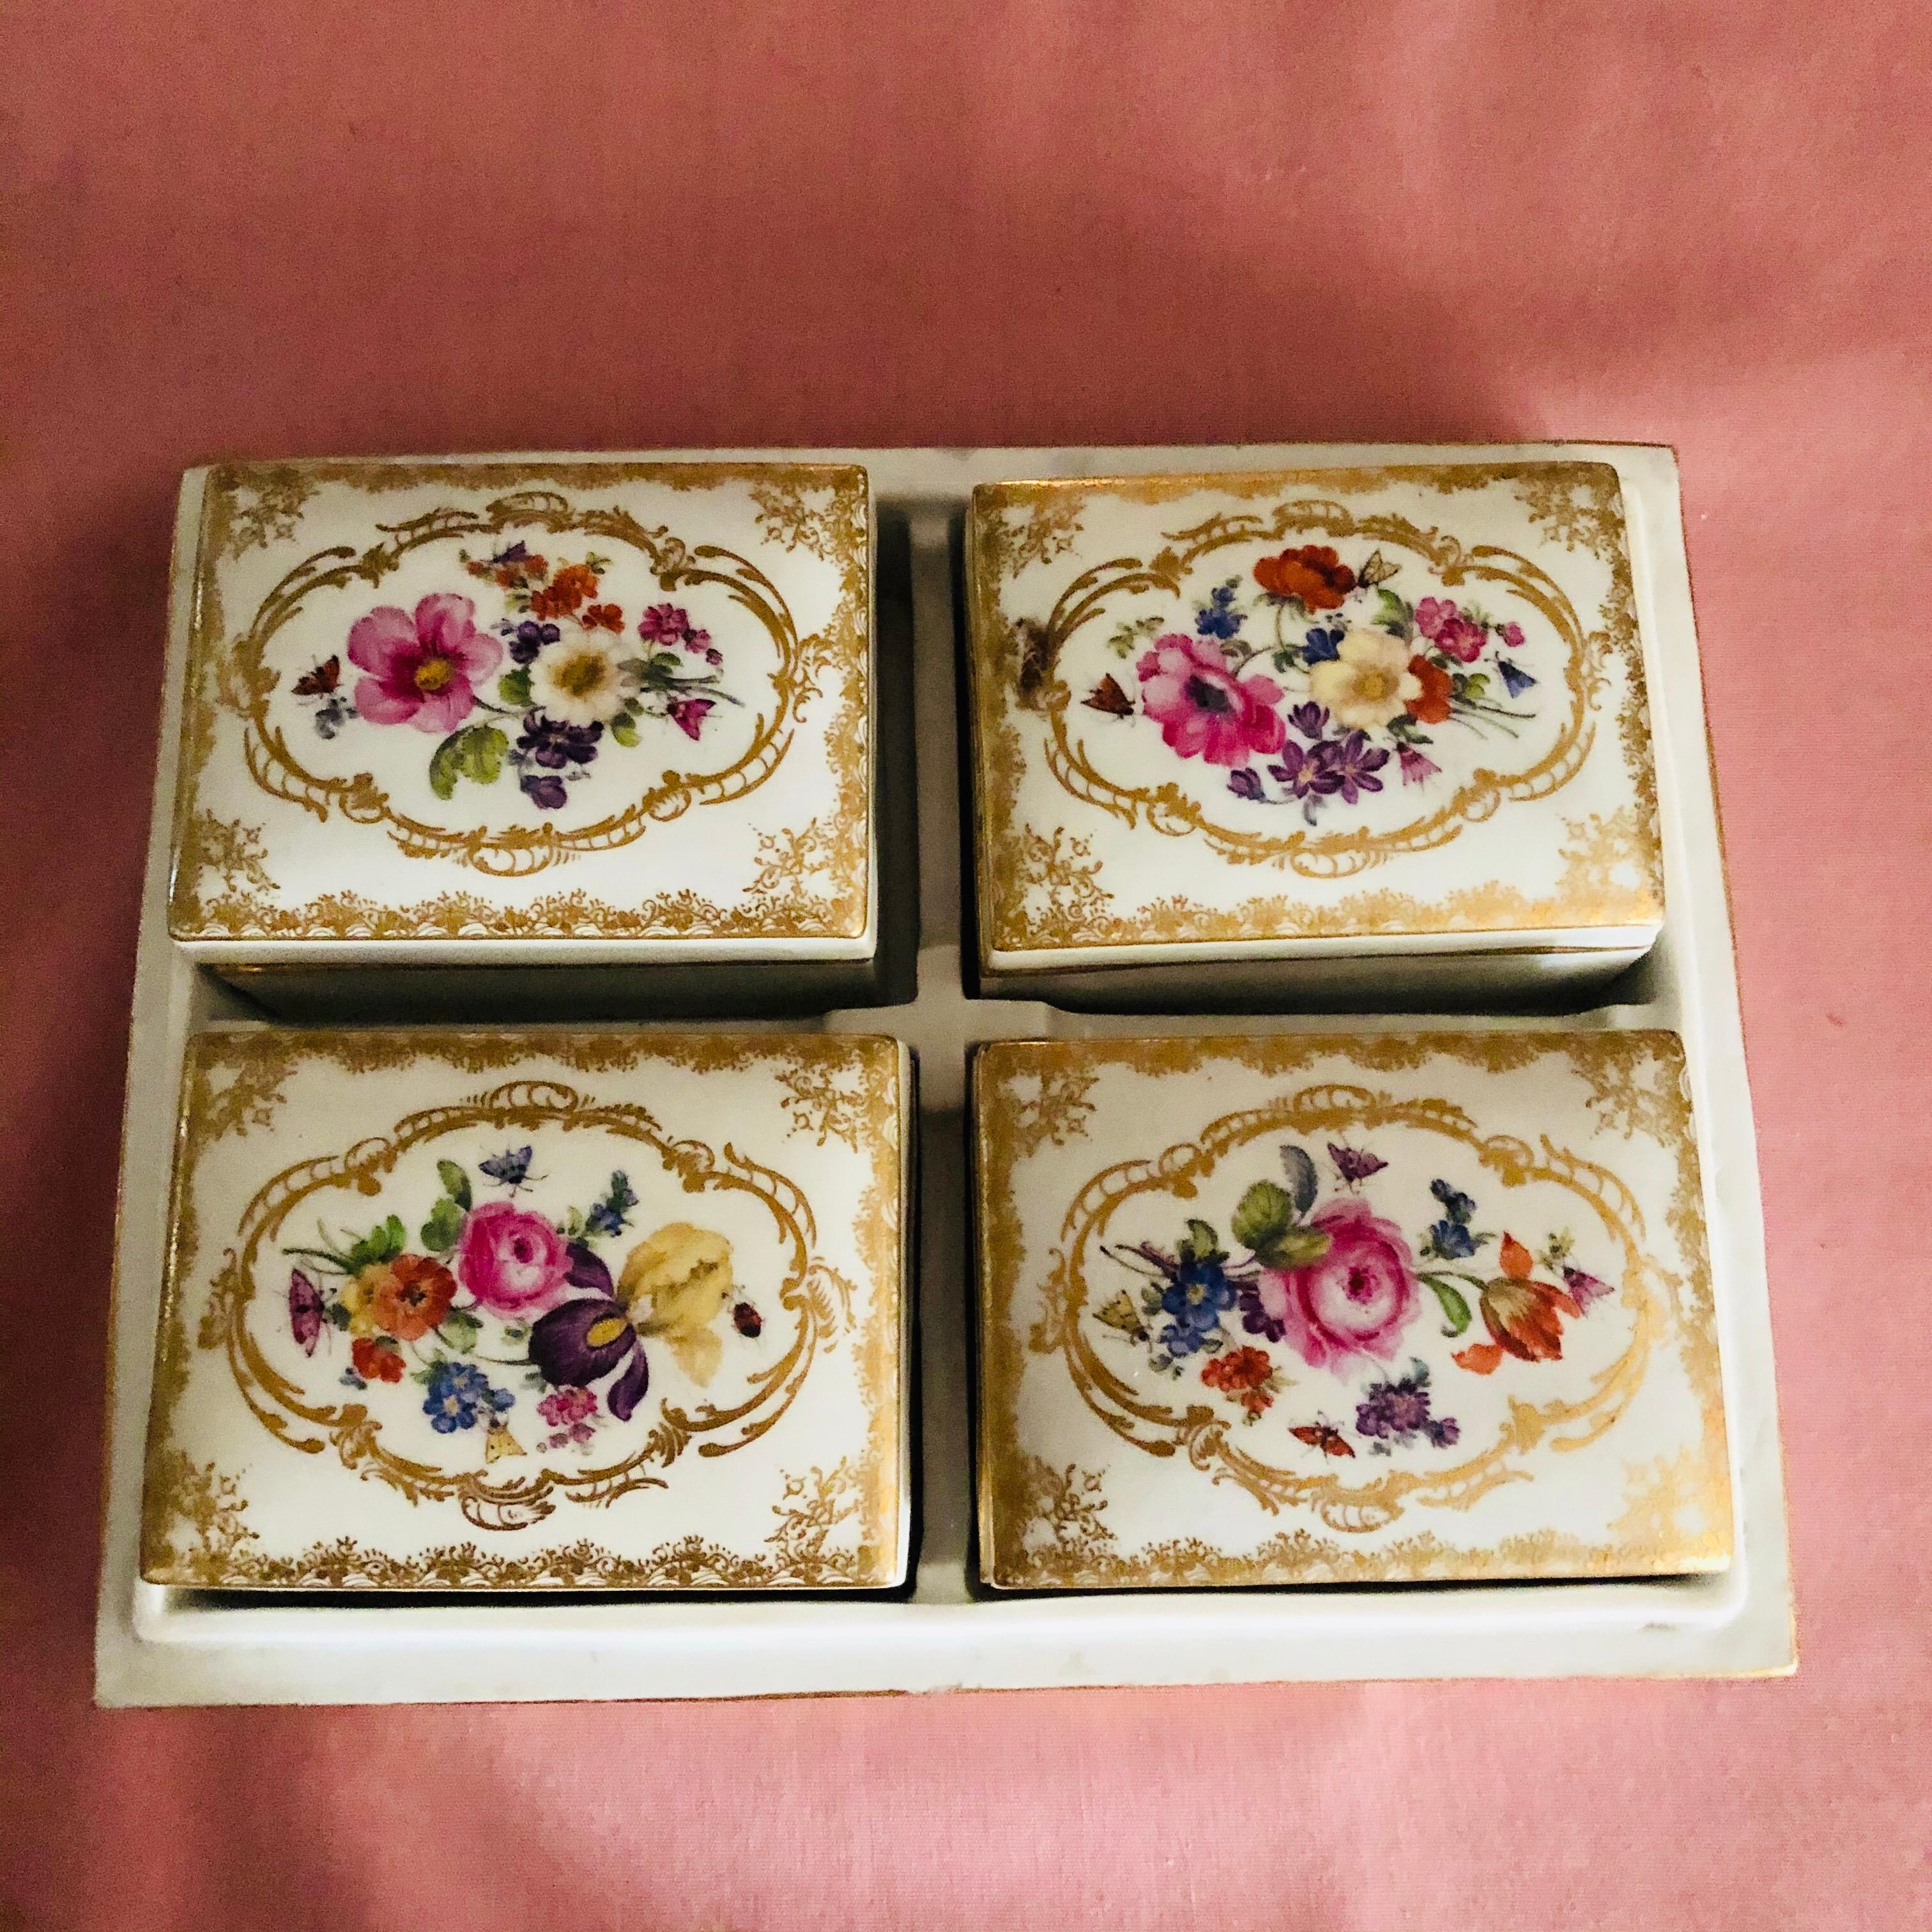 Hand-Painted Meissen Late 19th Century Box with Four Smaller Boxes Inside It